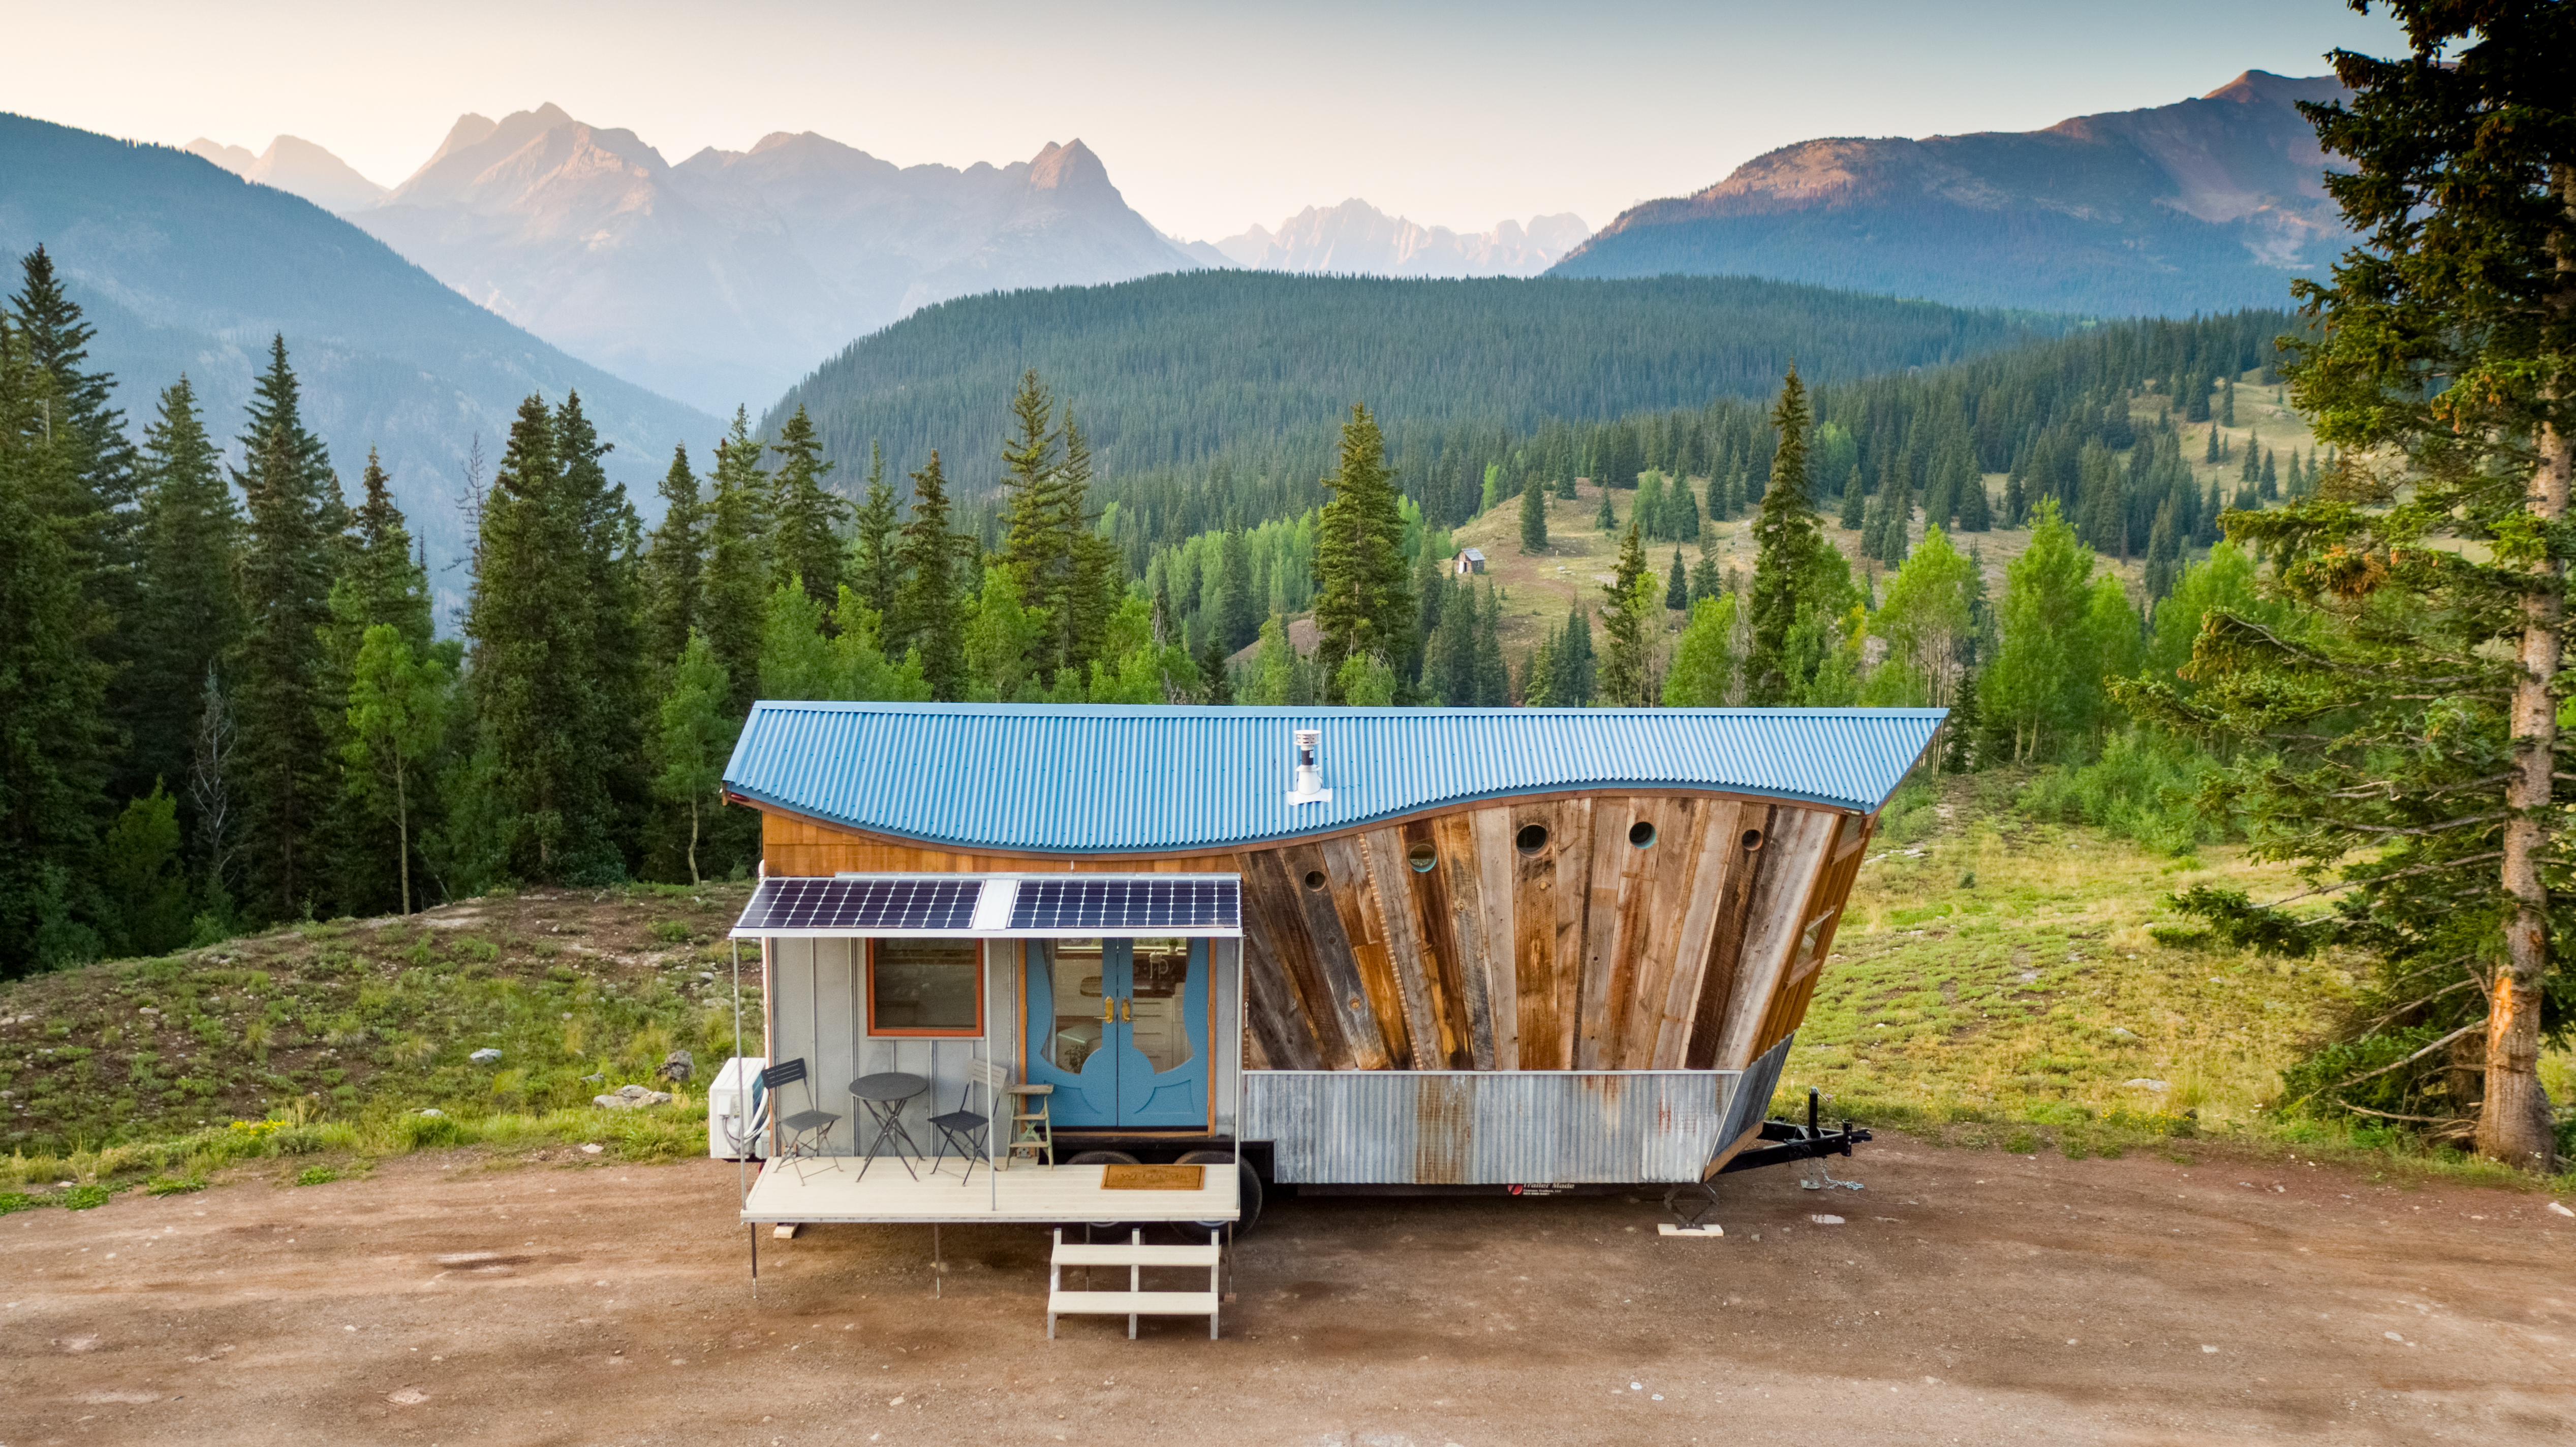 Colorado Mountains Tiny Homes With Land for Sale - 36 Properties